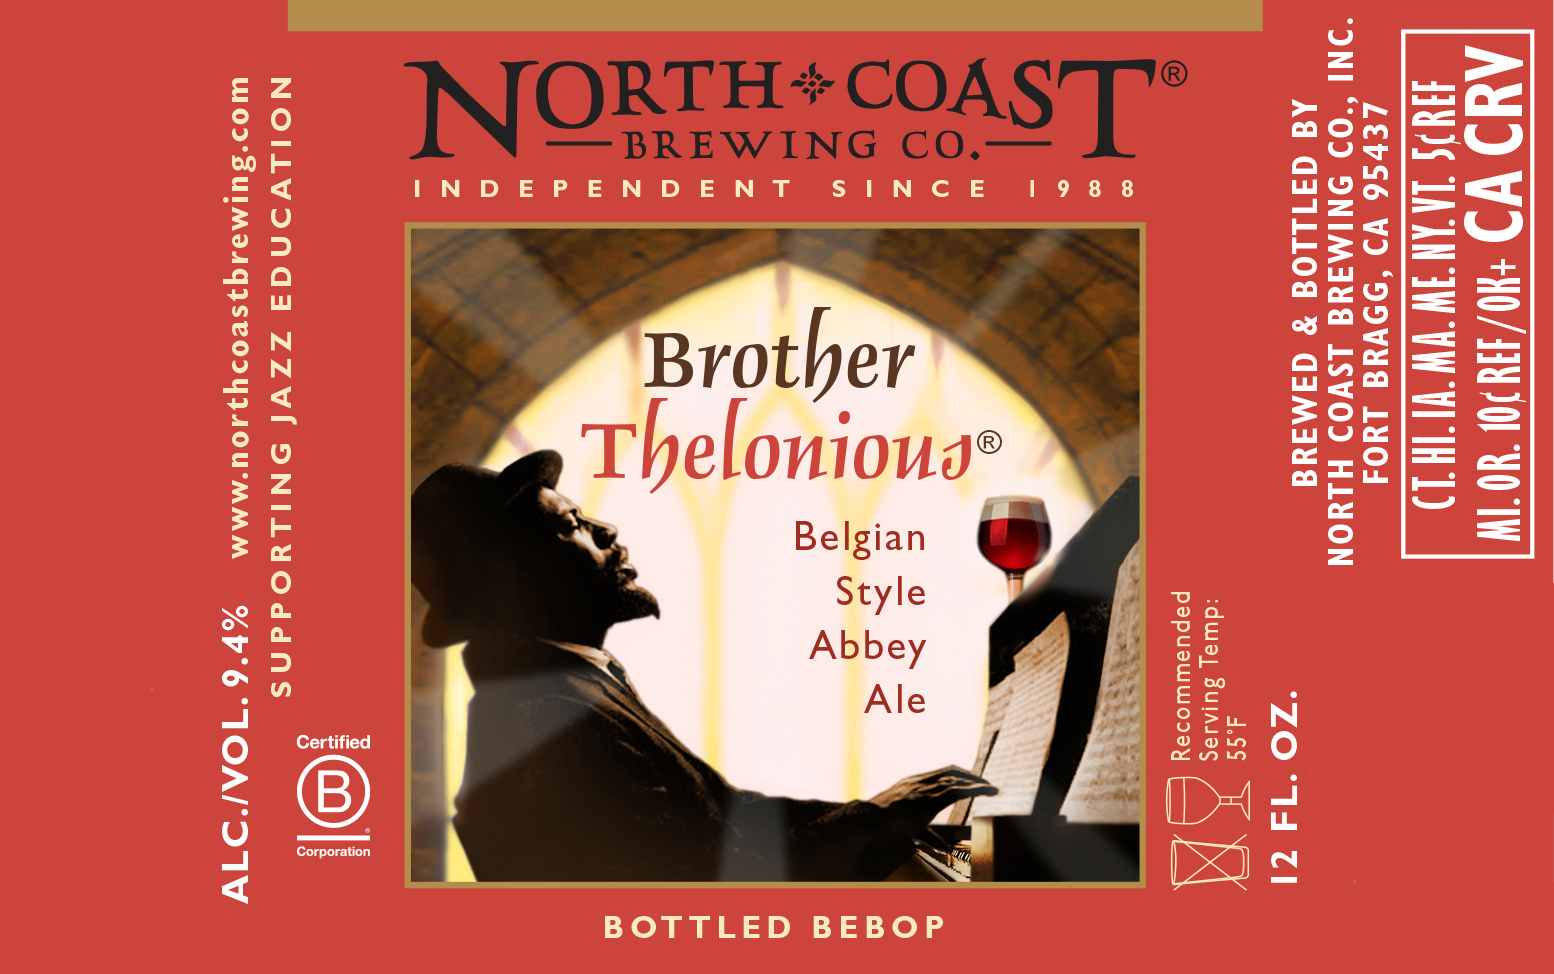 North Coast Brewing Company Reintroduces Brother Thelonious with New Label